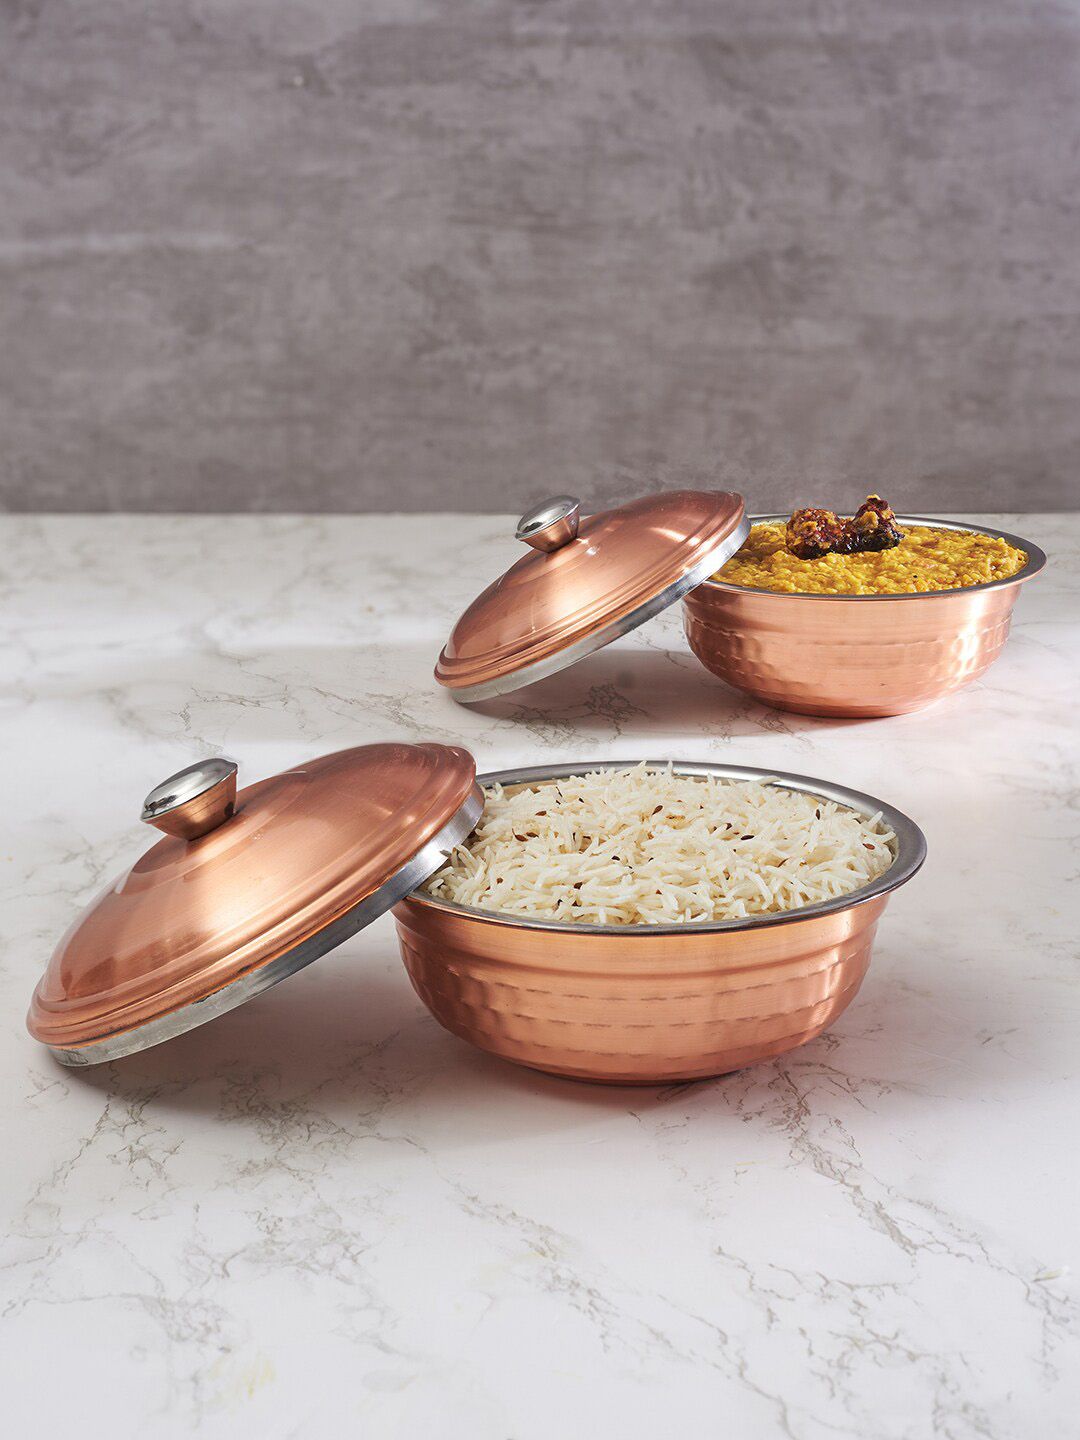 HomeTown Set Of 2 Stainless Steel Serving Bowls Price in India